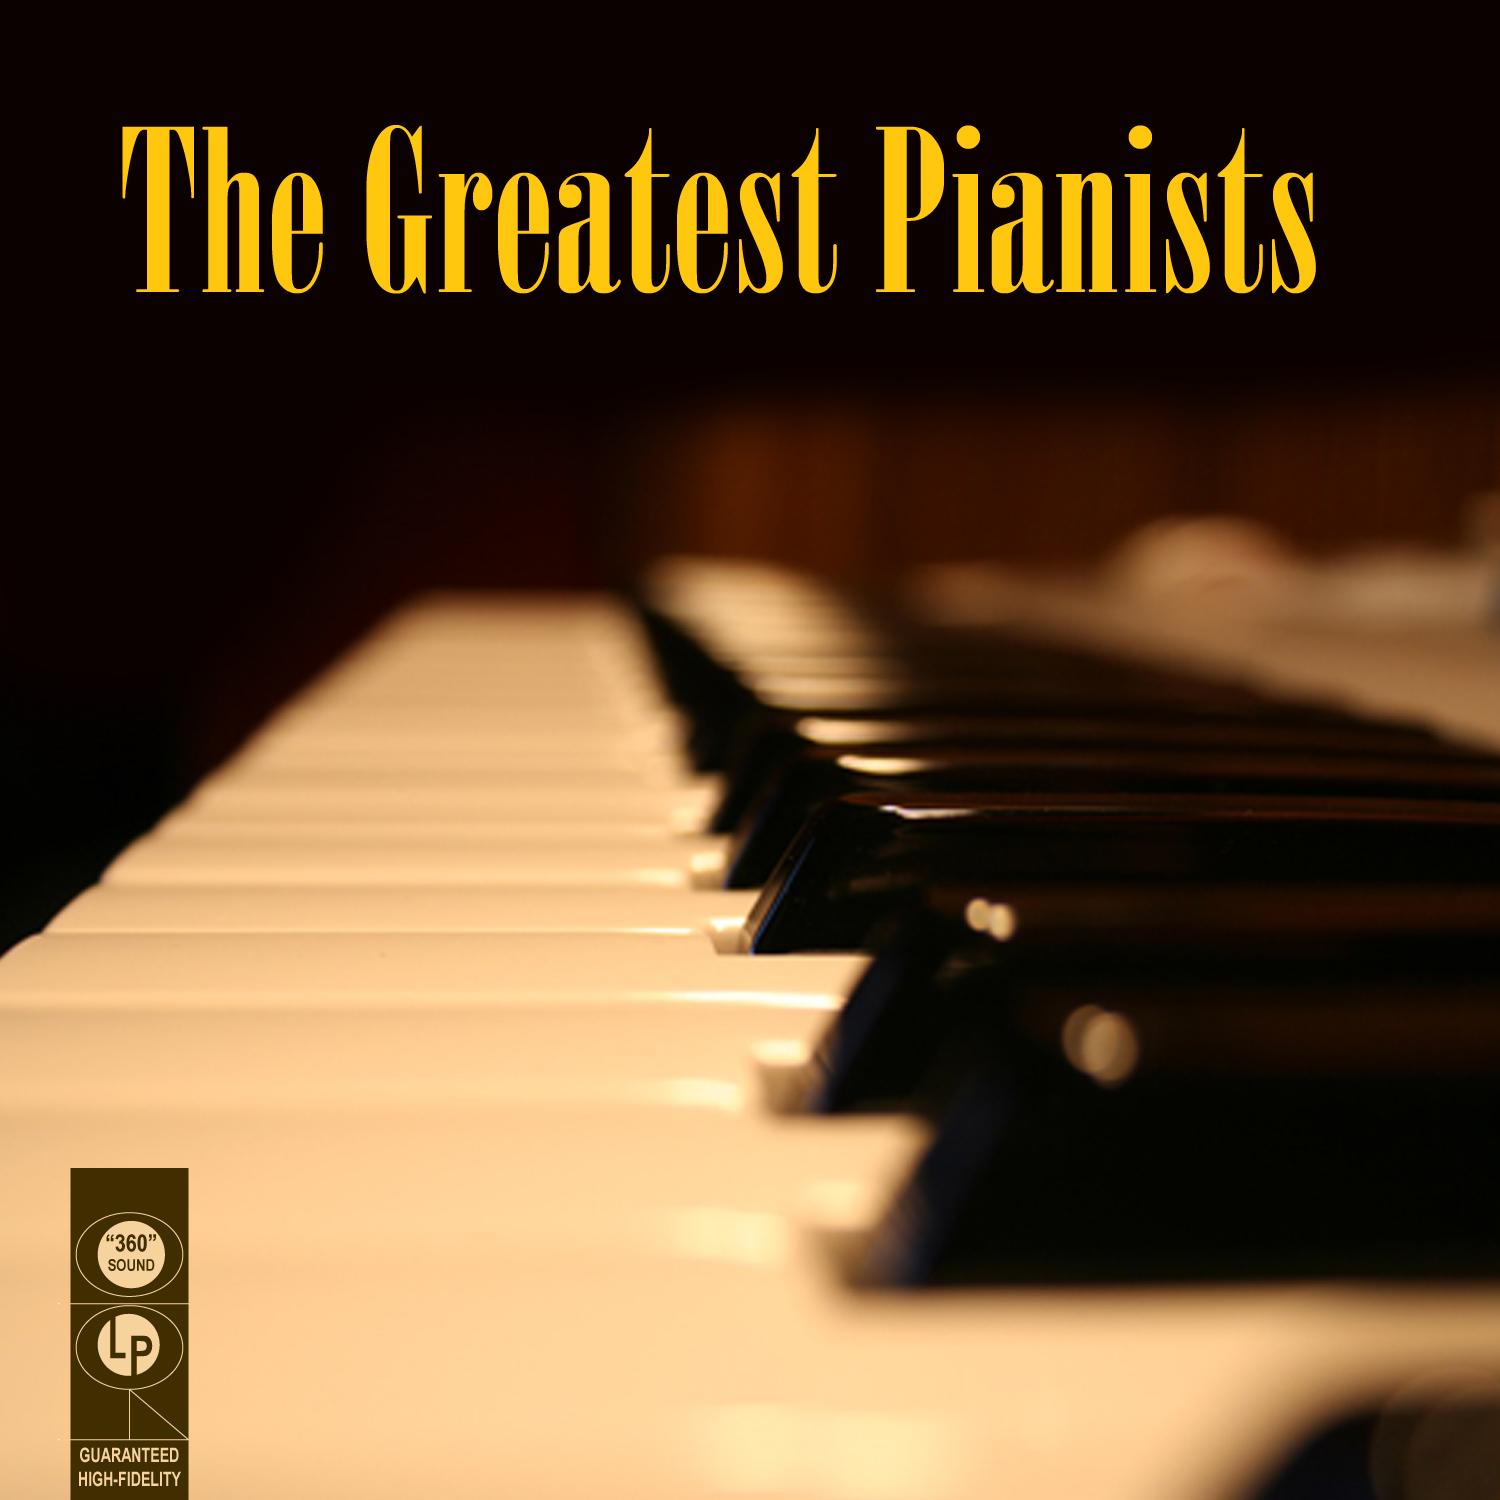 The Greatest Pianists